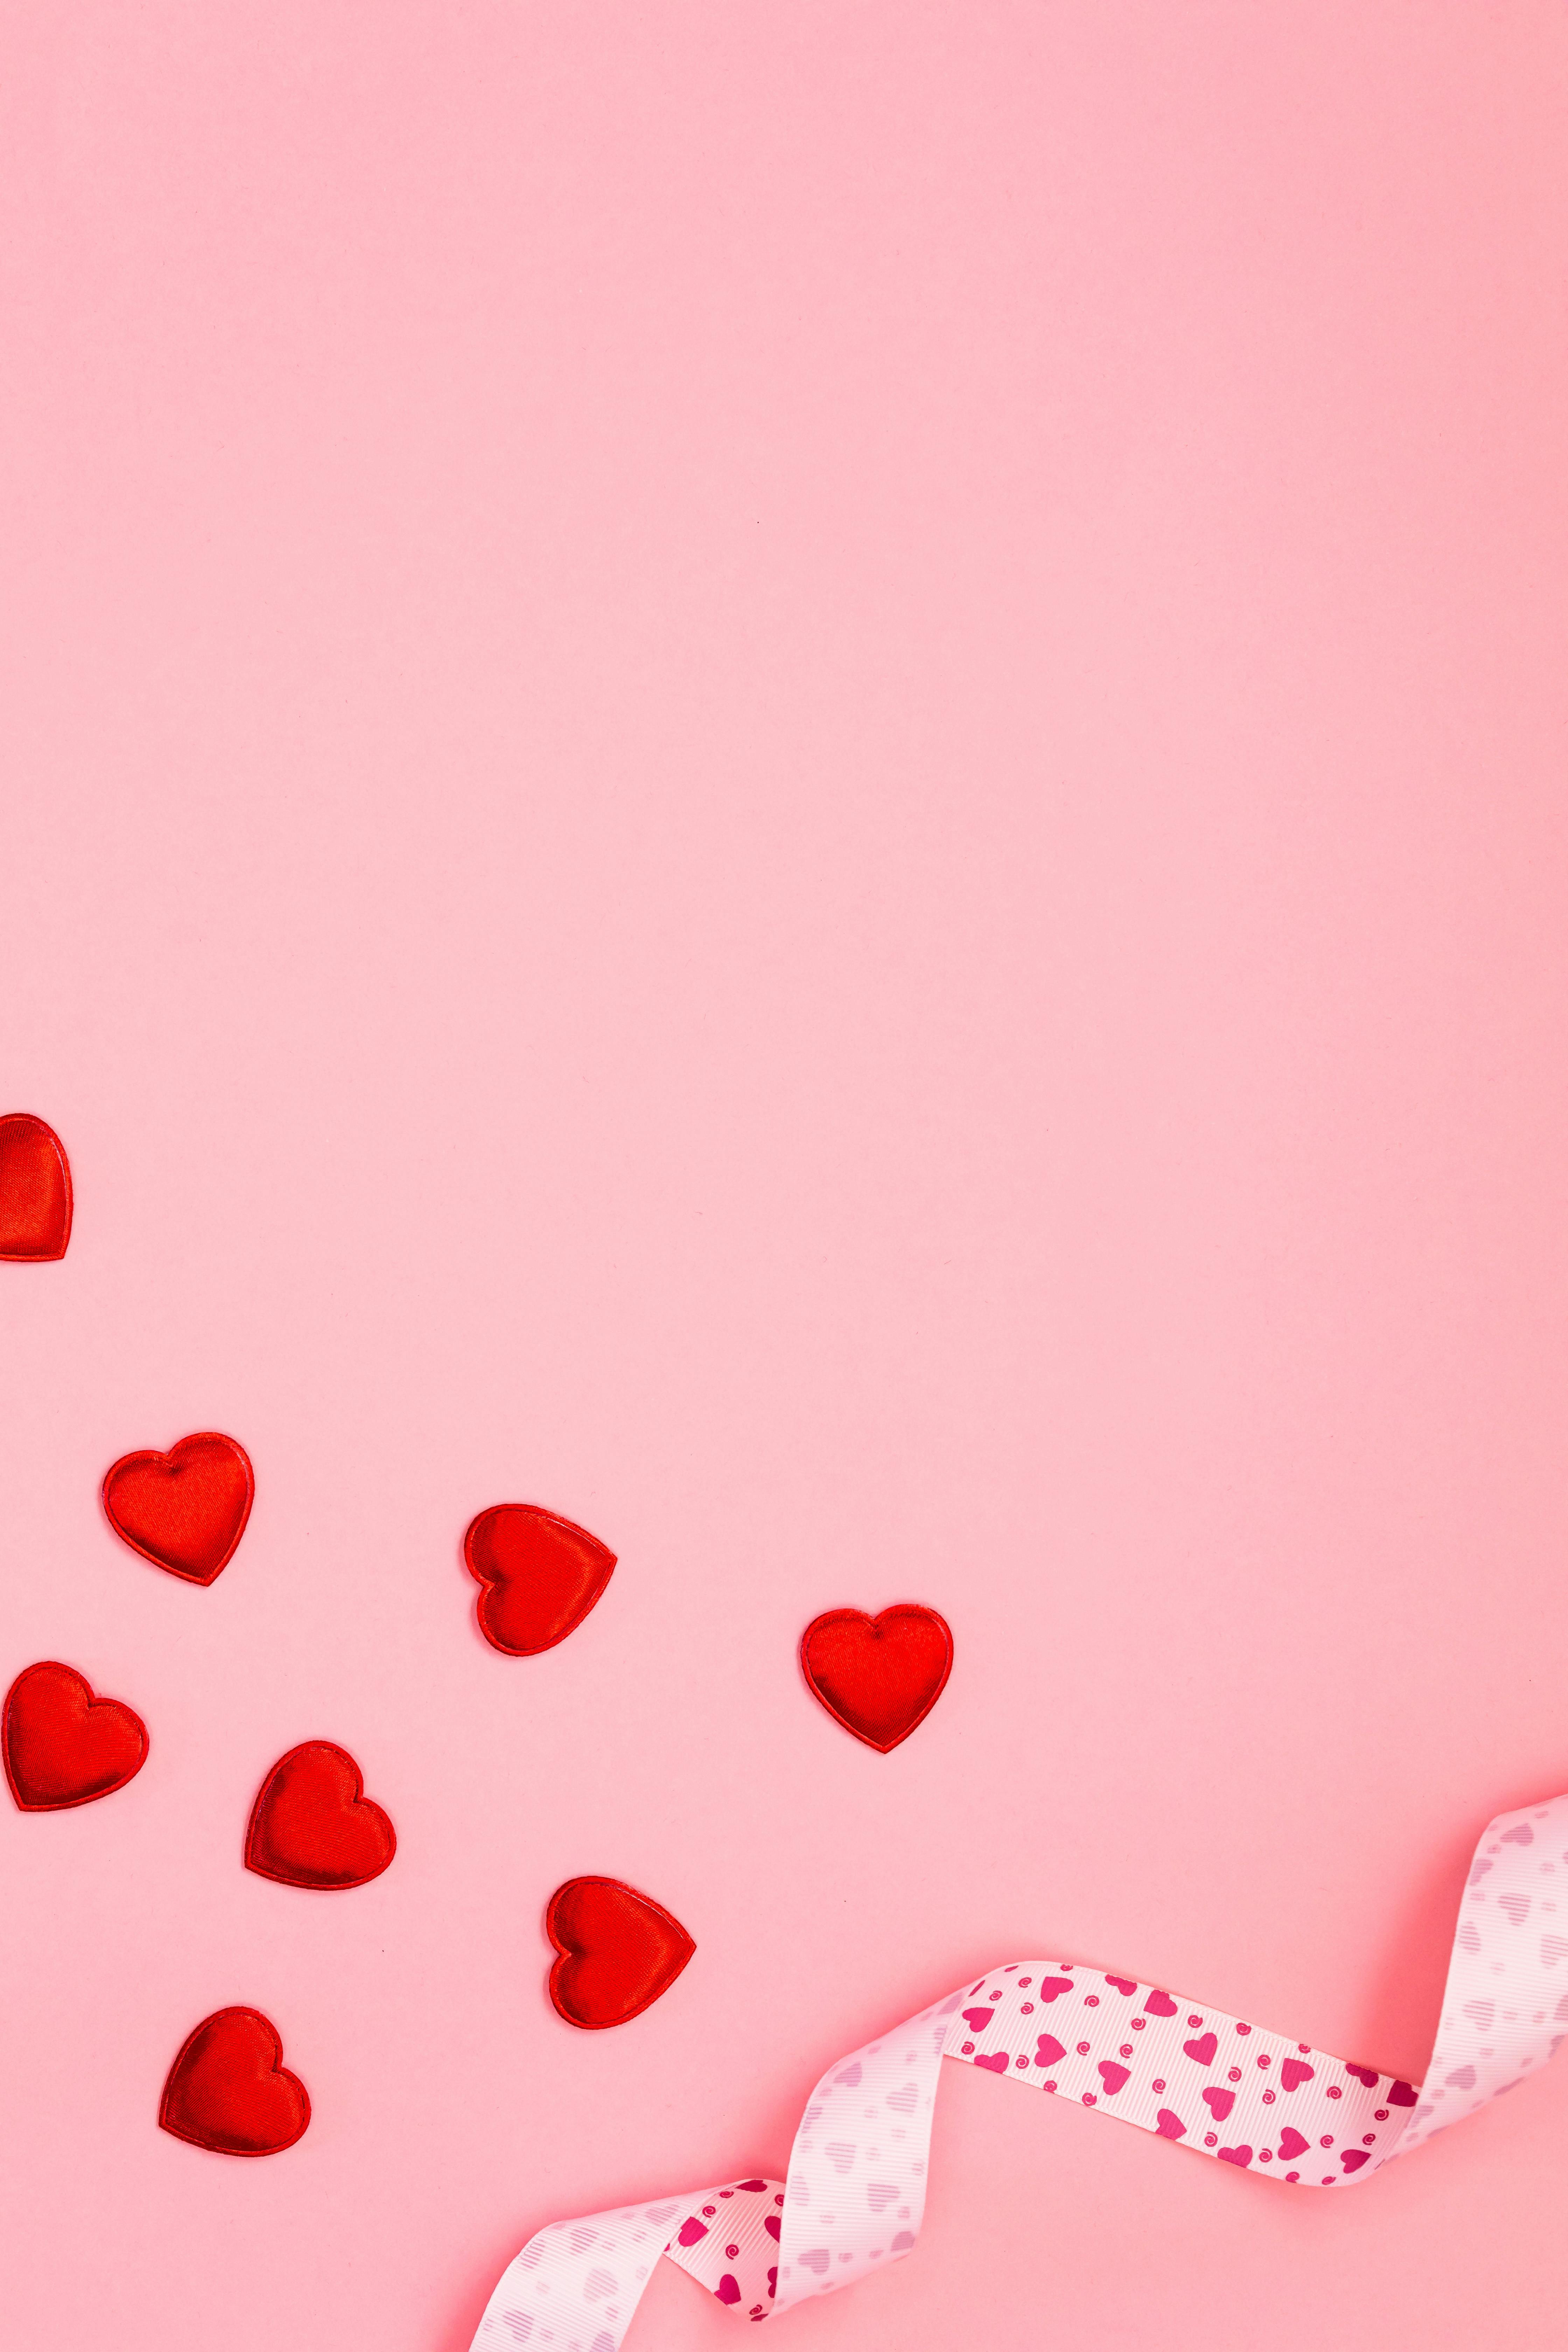 Broken Heart against a Blue Background · Free Stock Photo